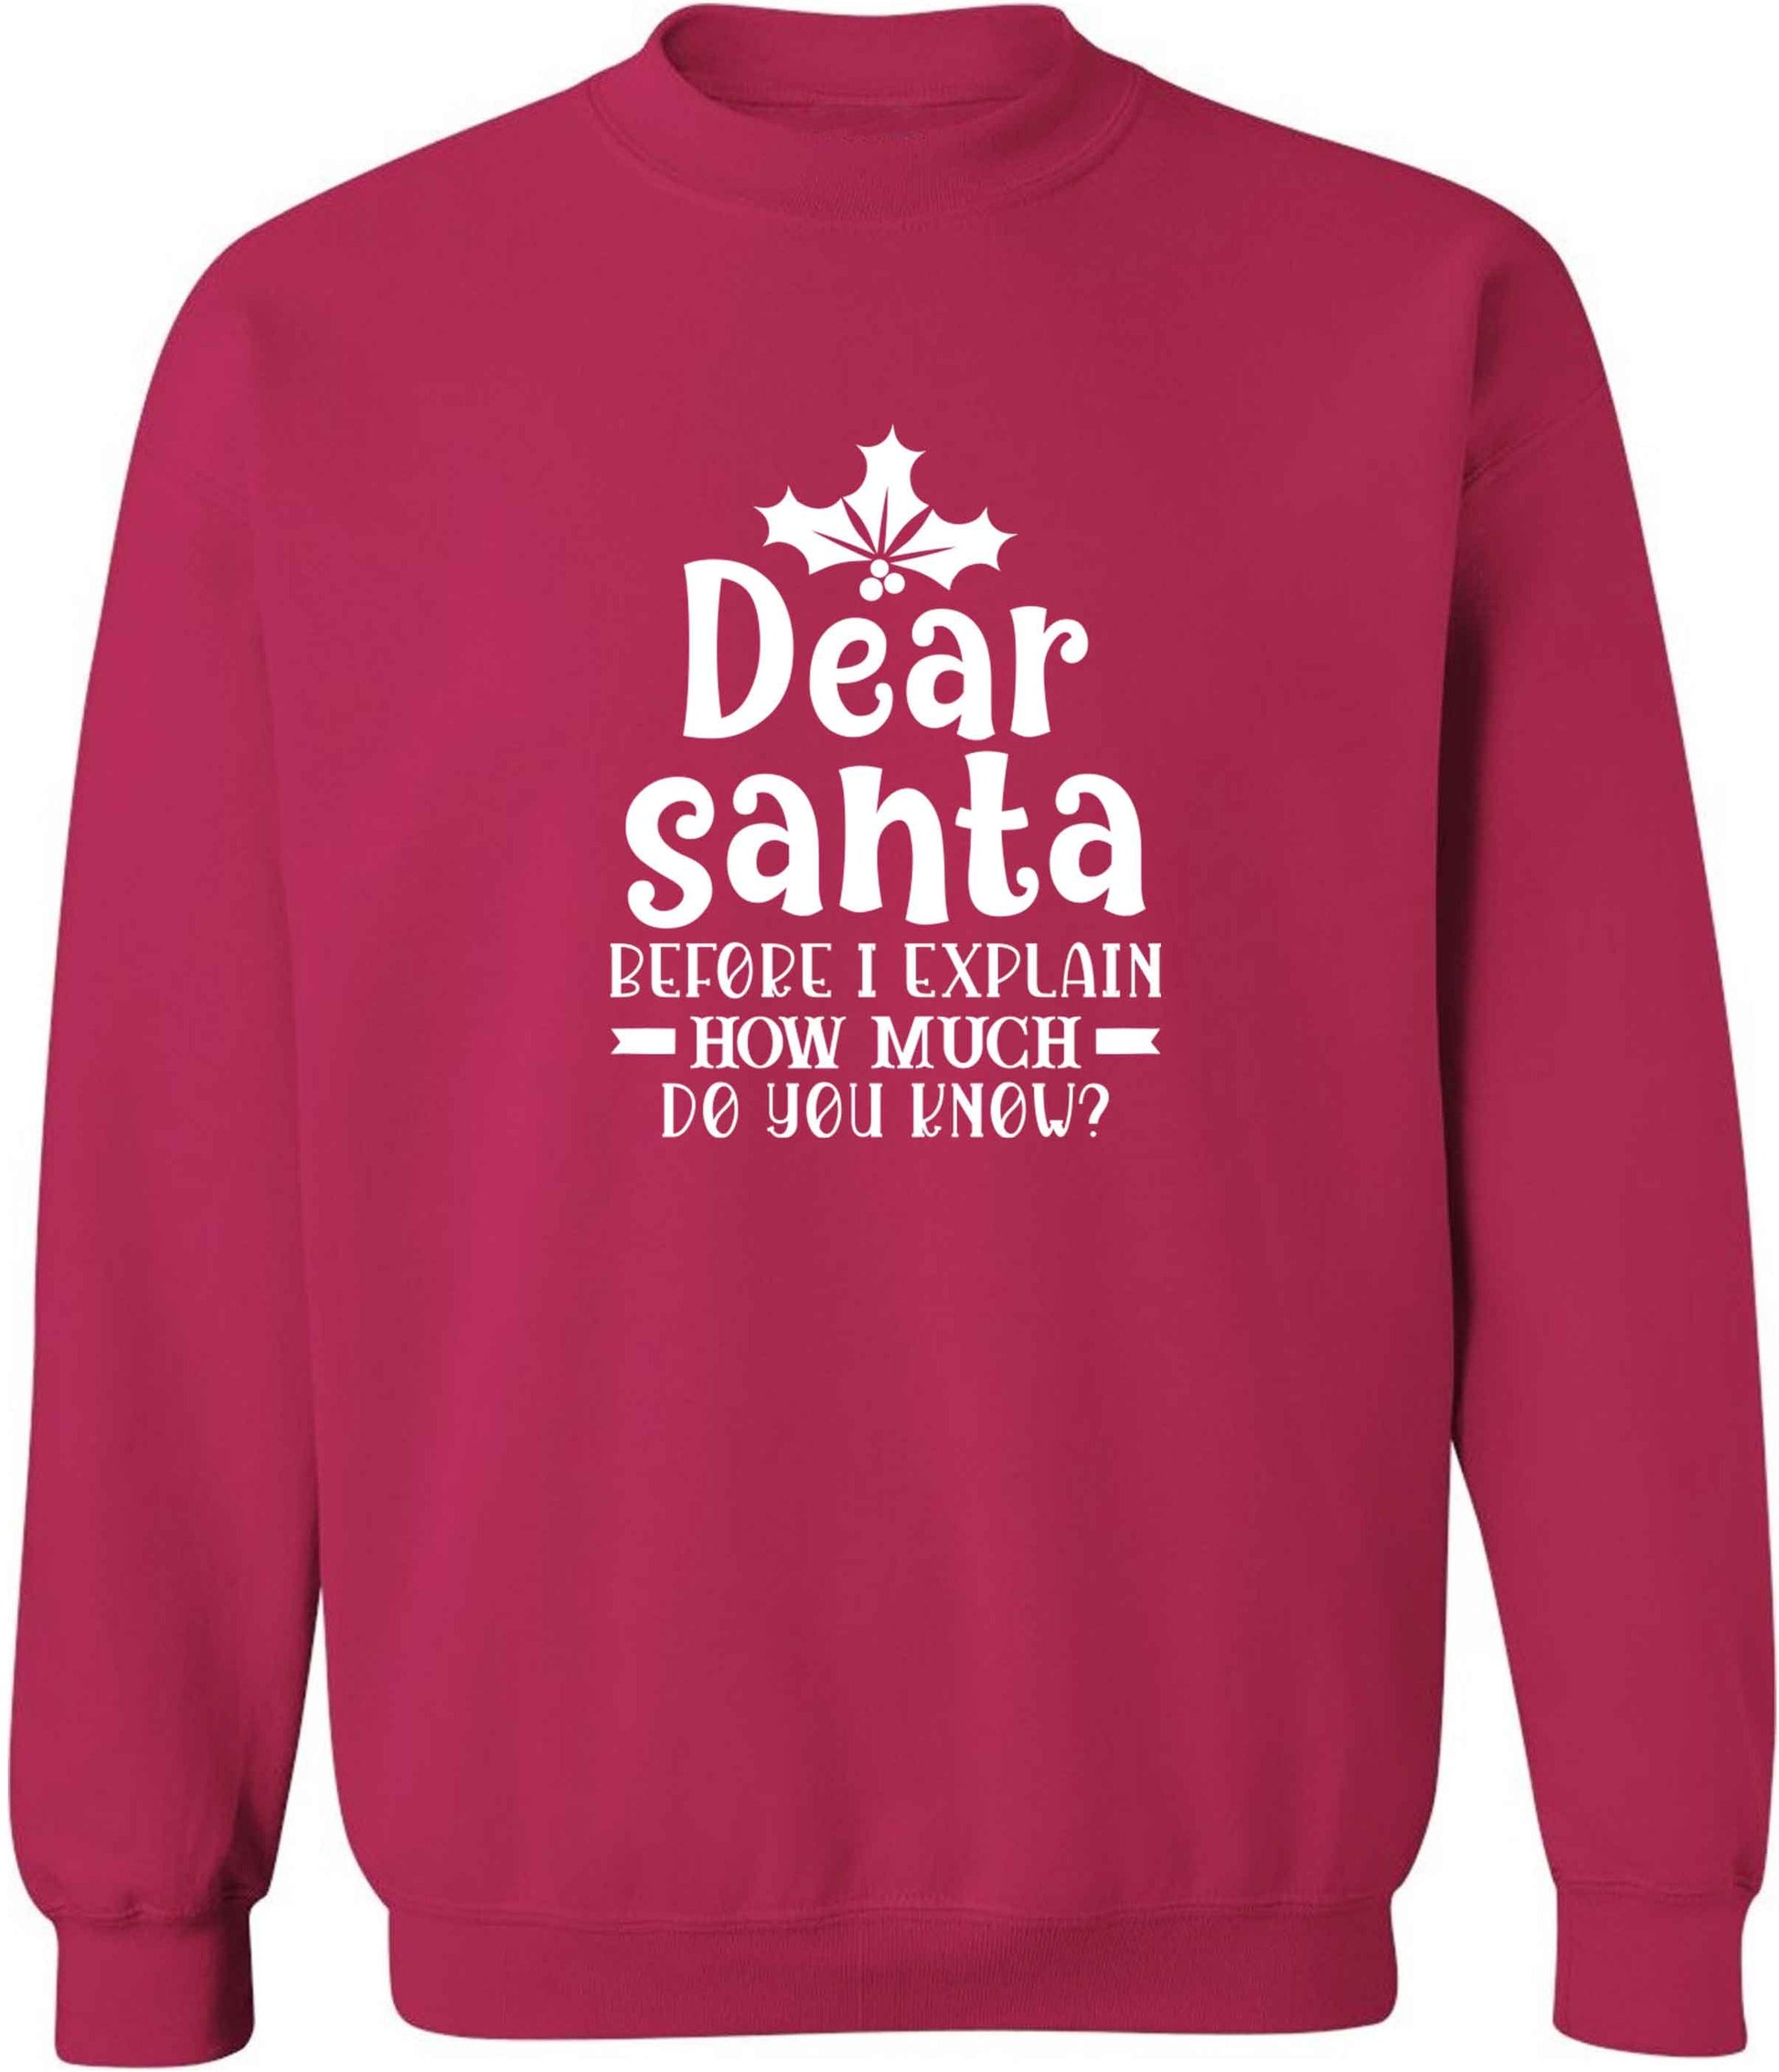 Santa before I explain how much do you know? adult's unisex pink sweater 2XL